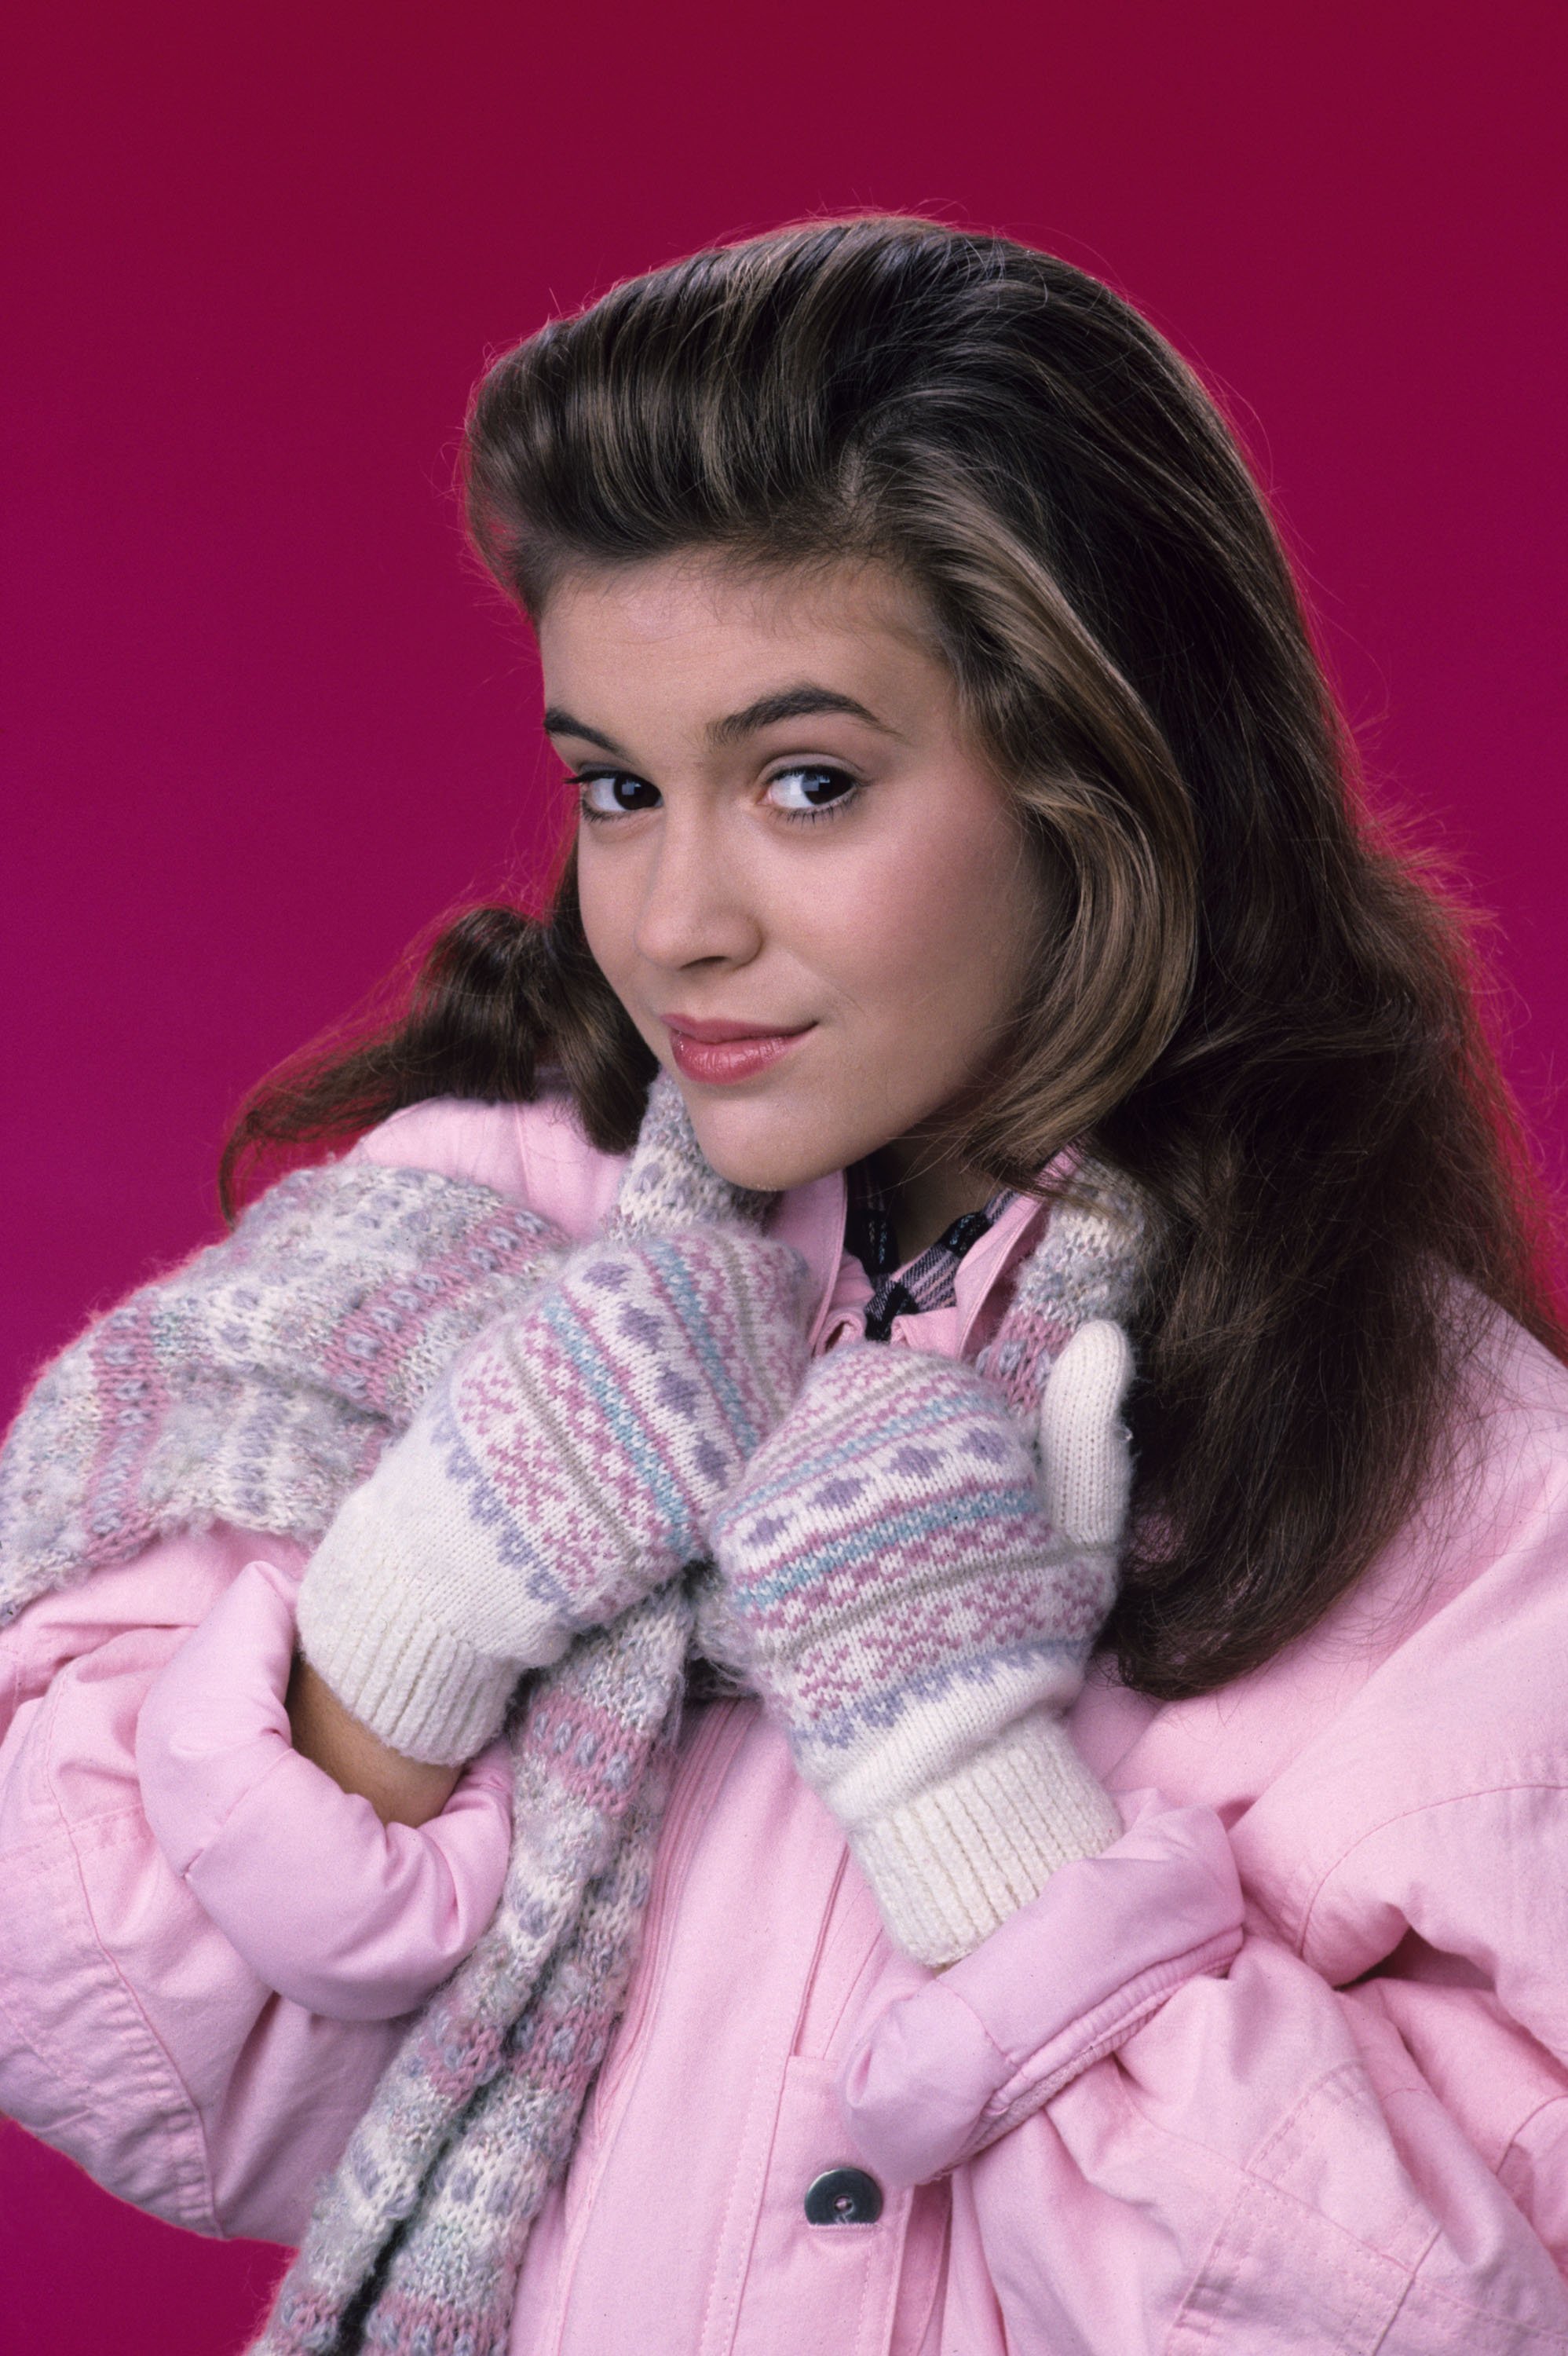 WHO'S THE BOSS ? - Gallery - Season Four - 11/10/87, Alyssa Milano (Samantha) | Photo: Getty Images